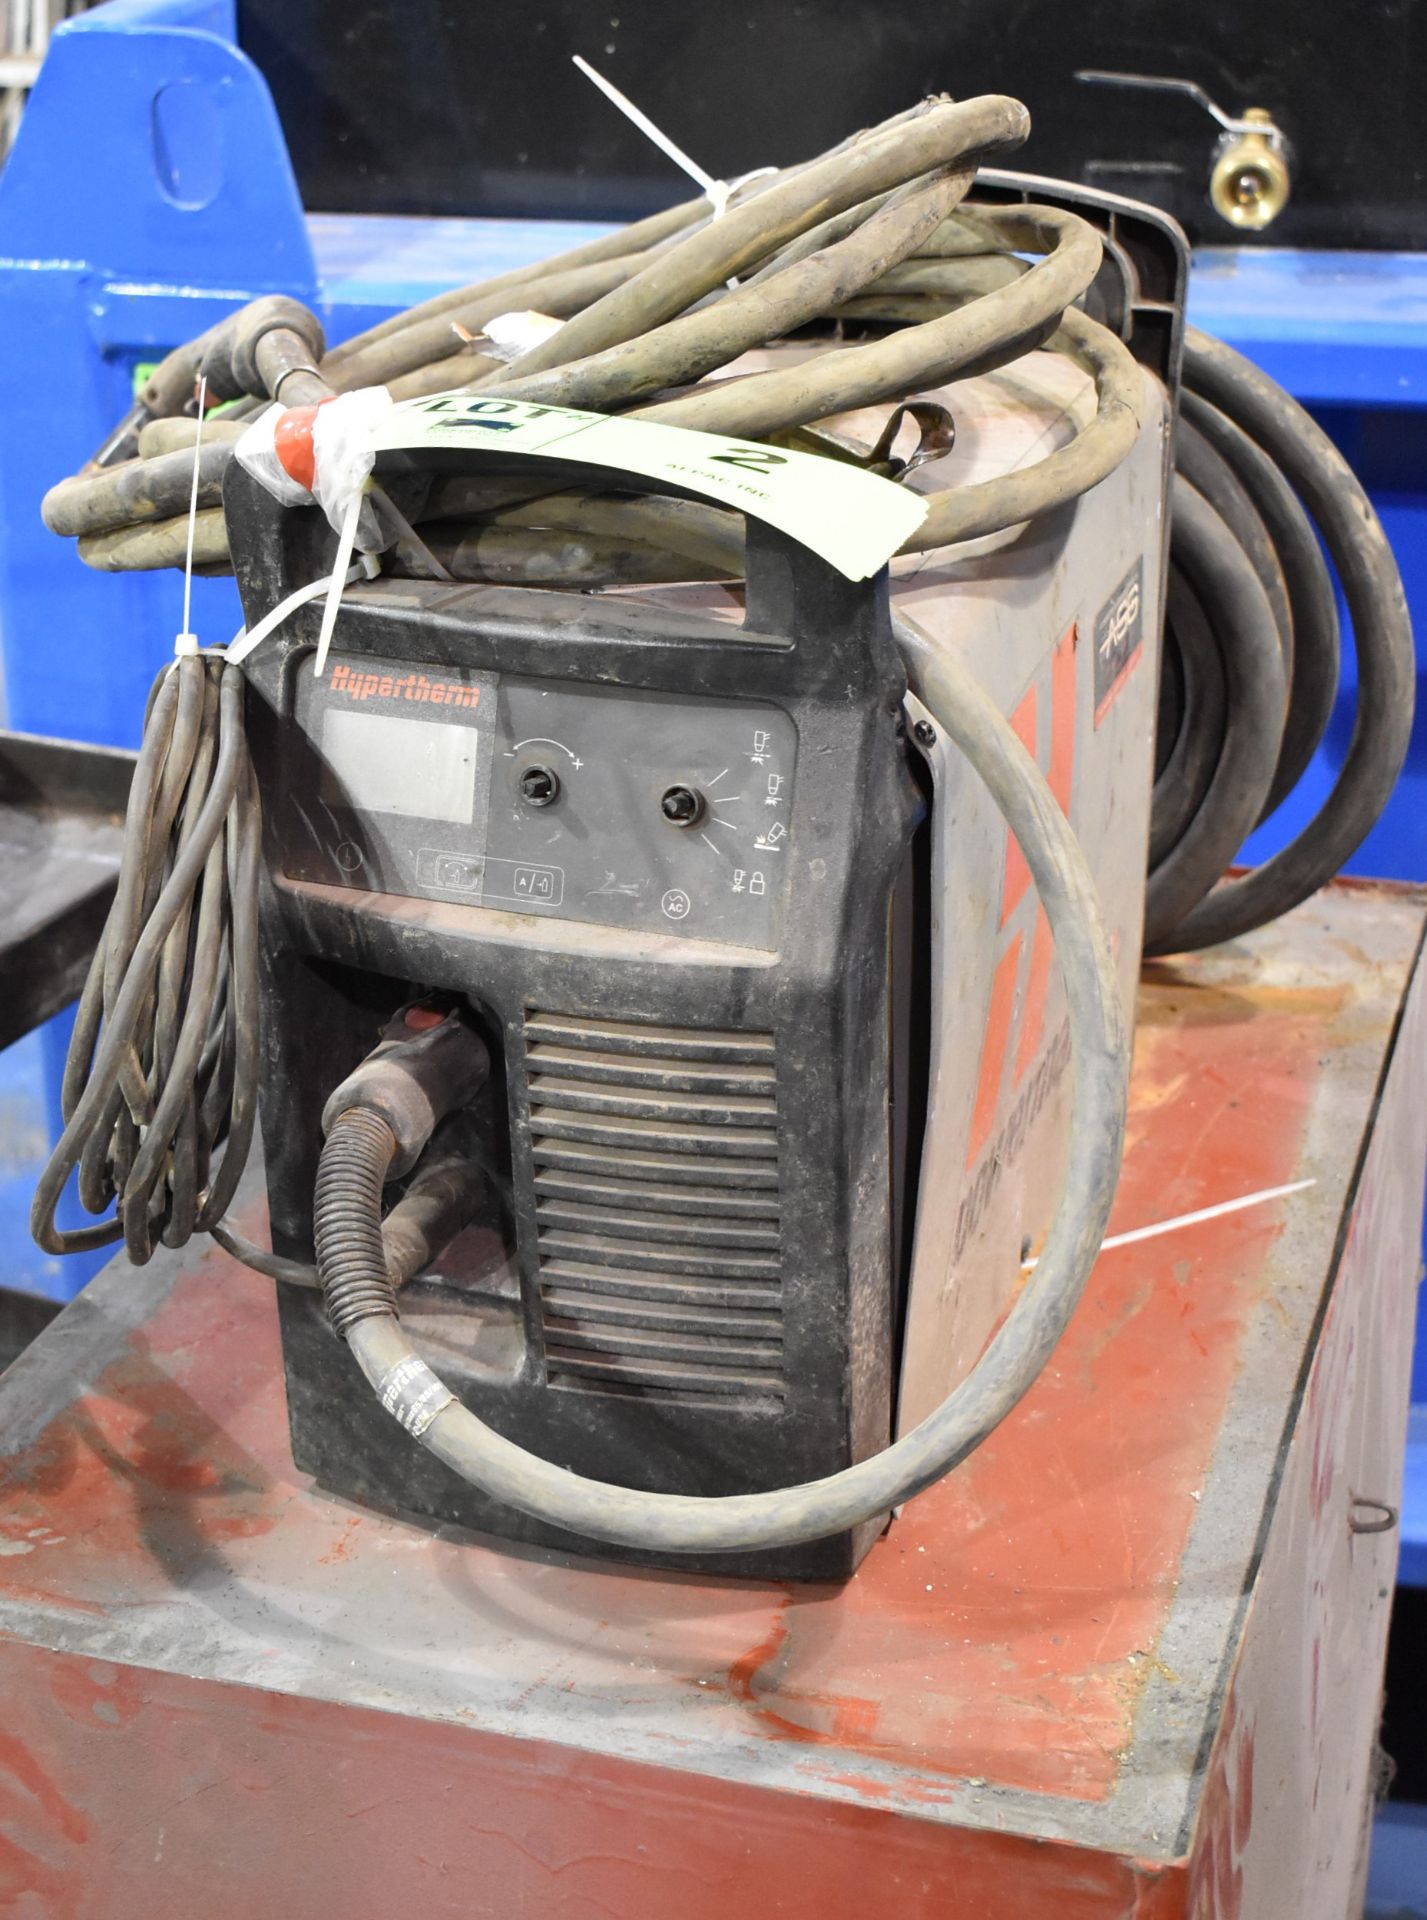 HYPERTHERM POWERMAX 65 PLASMA CUTTING SYSTEM WITH CABLES AND GUN, S/N 65-041682 (NOT IN SERVICE)